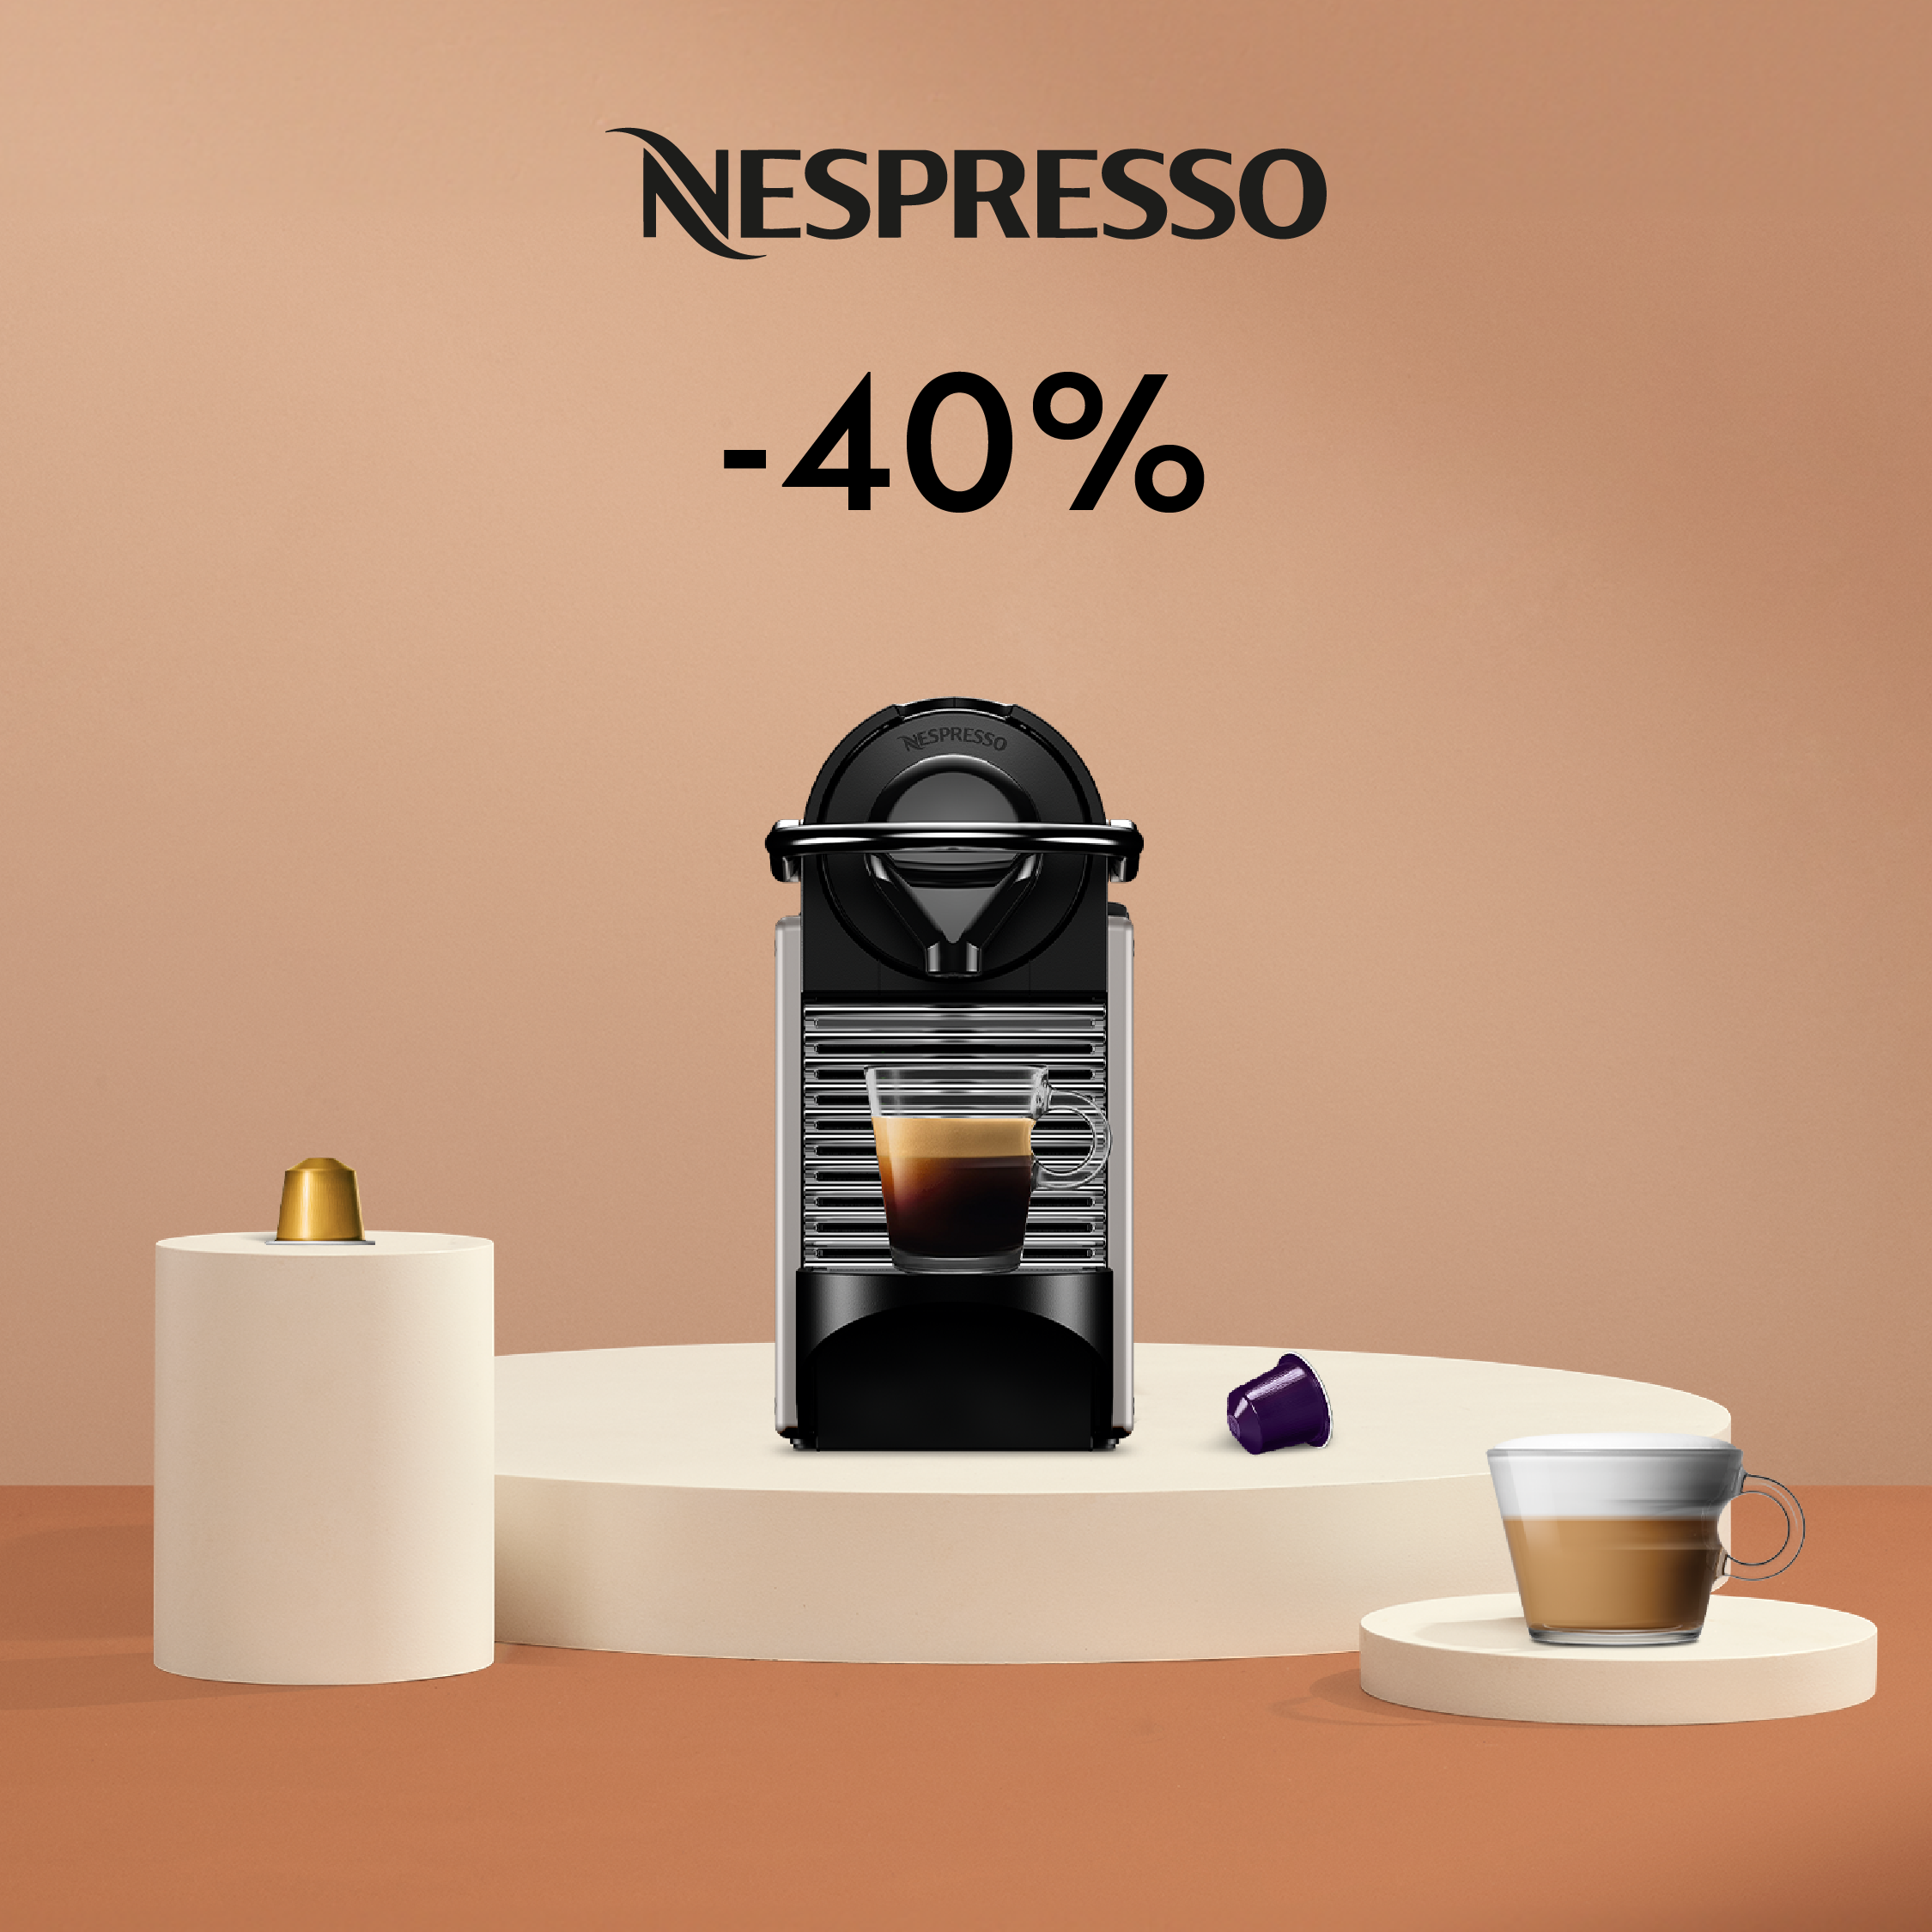 40% DISCOUNT ON THE PIXIE COFFEE MACHINE WHEN YOU BUY 200 CAPSULES!